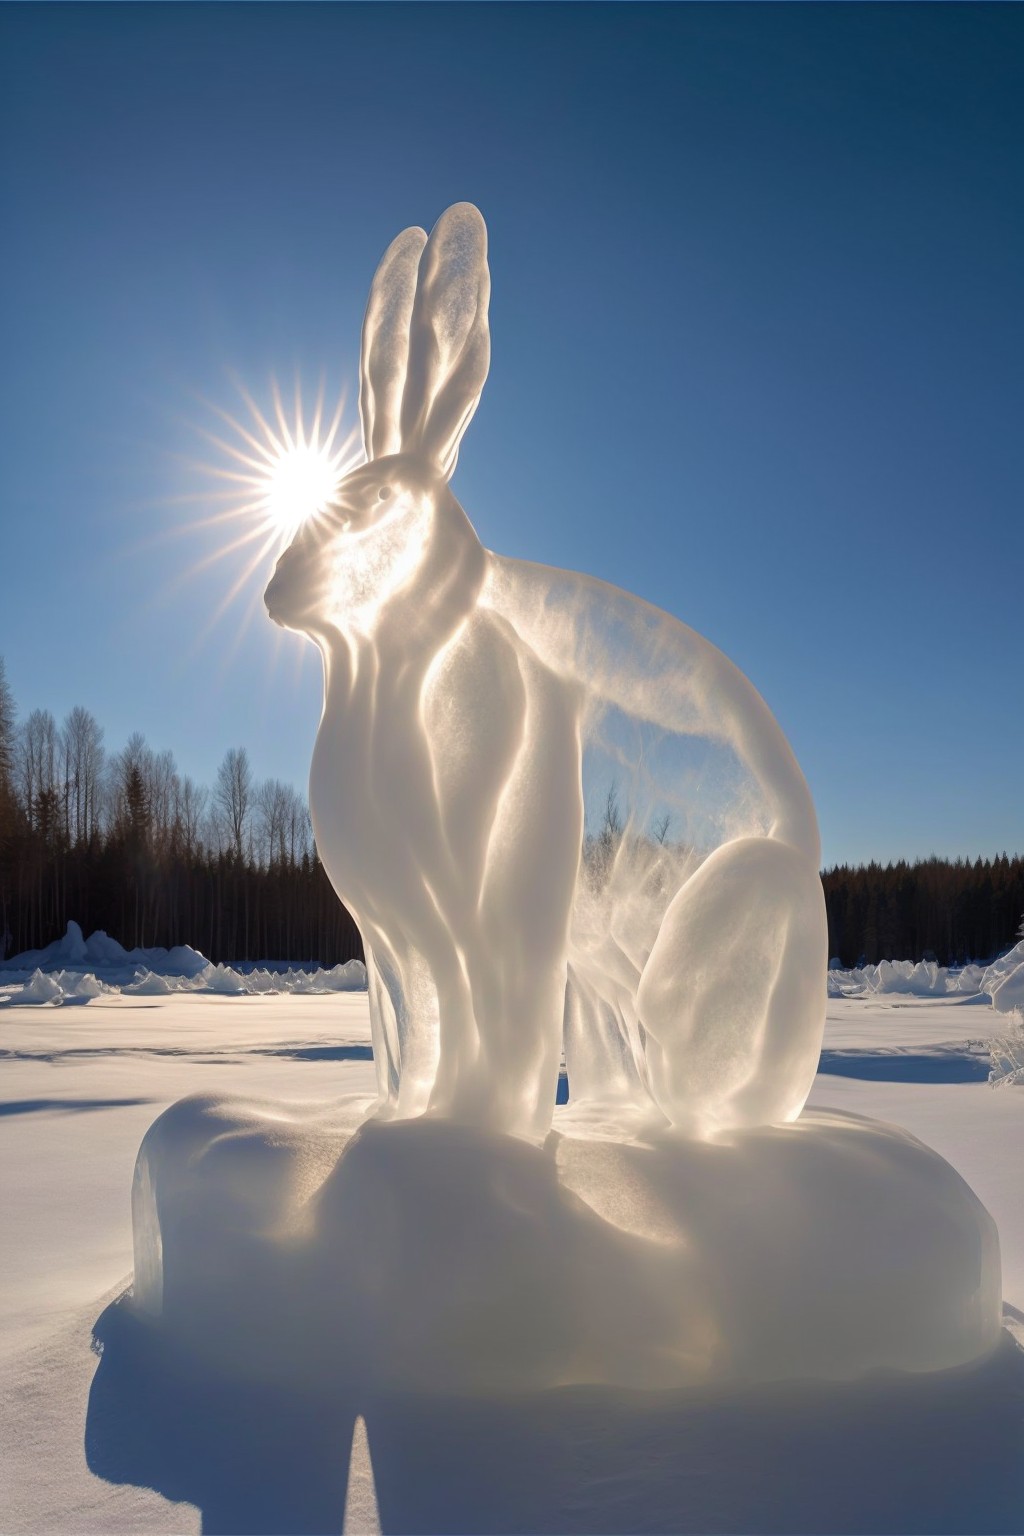 Rabbit sculpture made of ice and snow